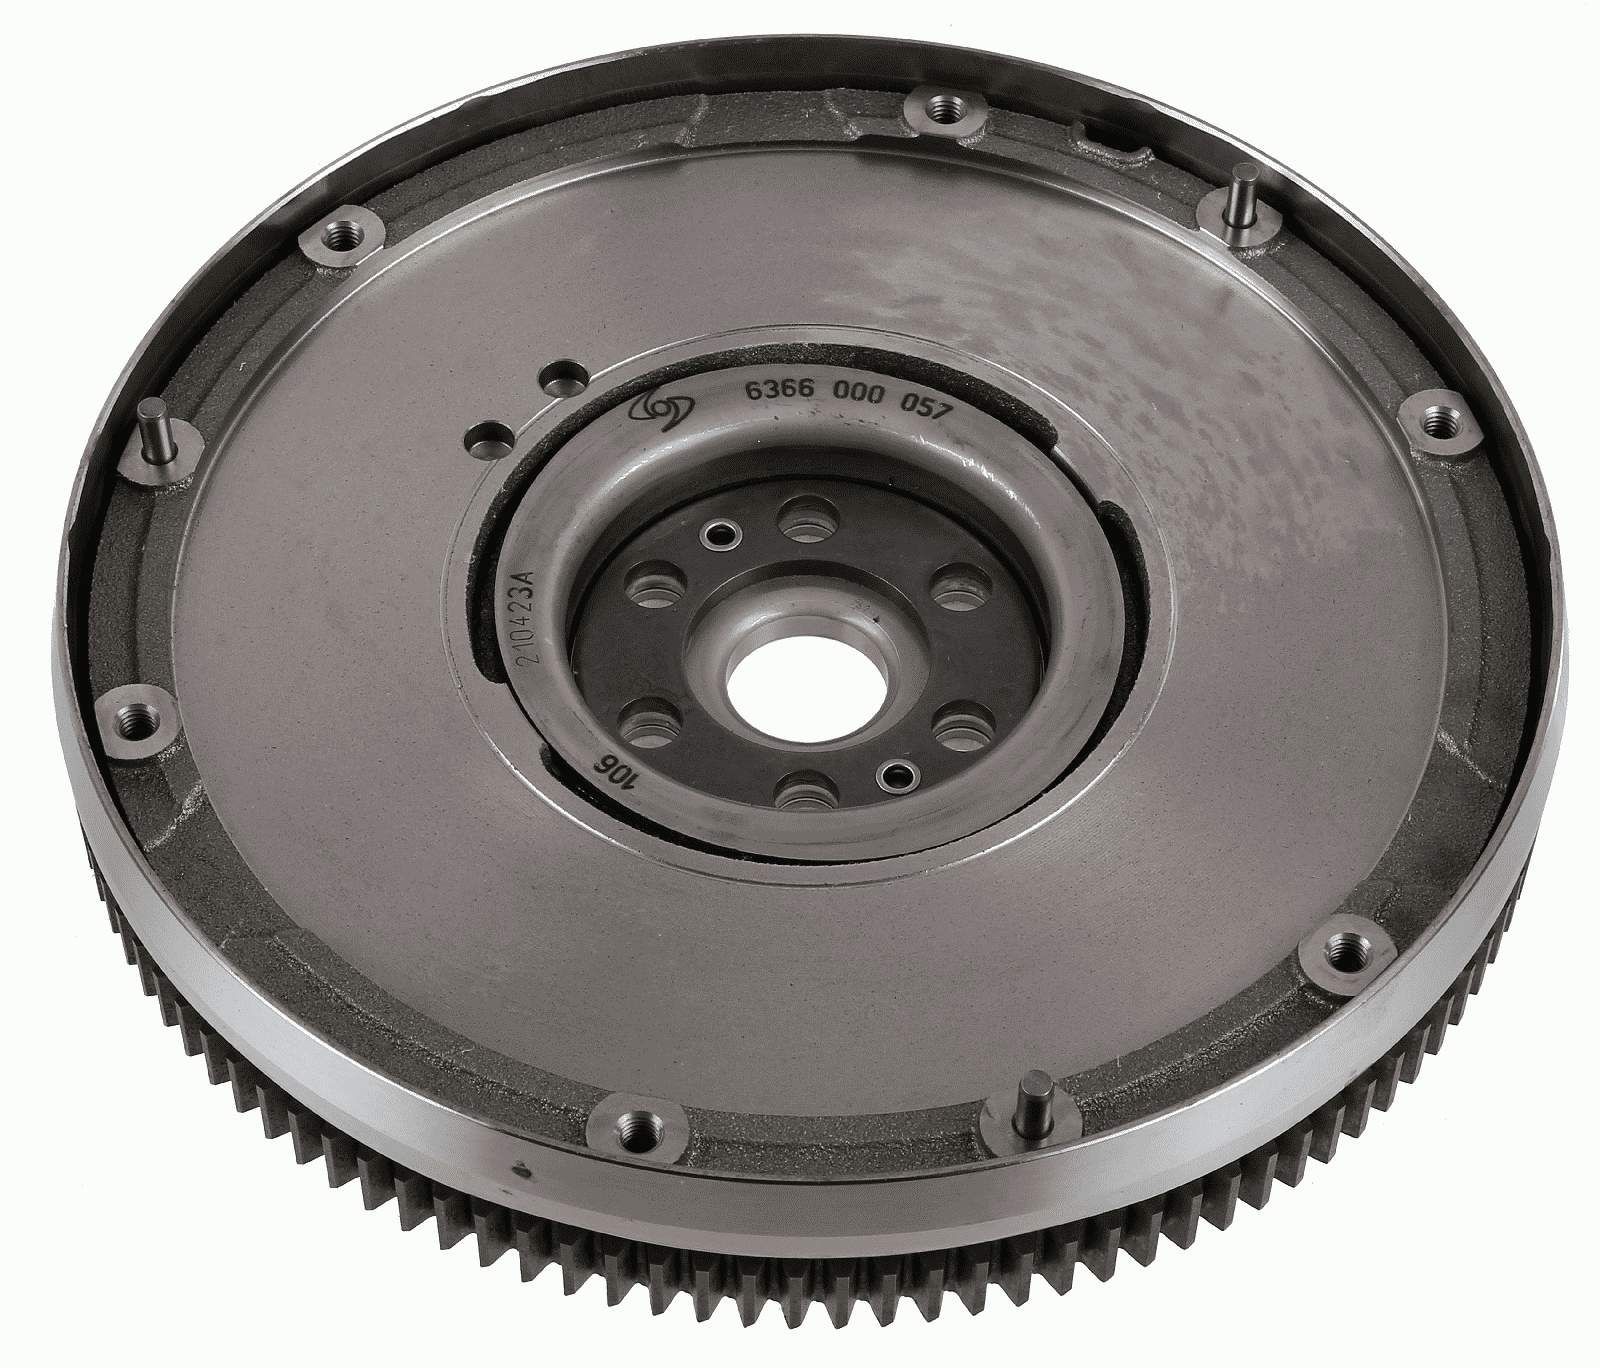 Clutch flywheel 6366000057 Ford FOCUS 2019 – buy replacement parts